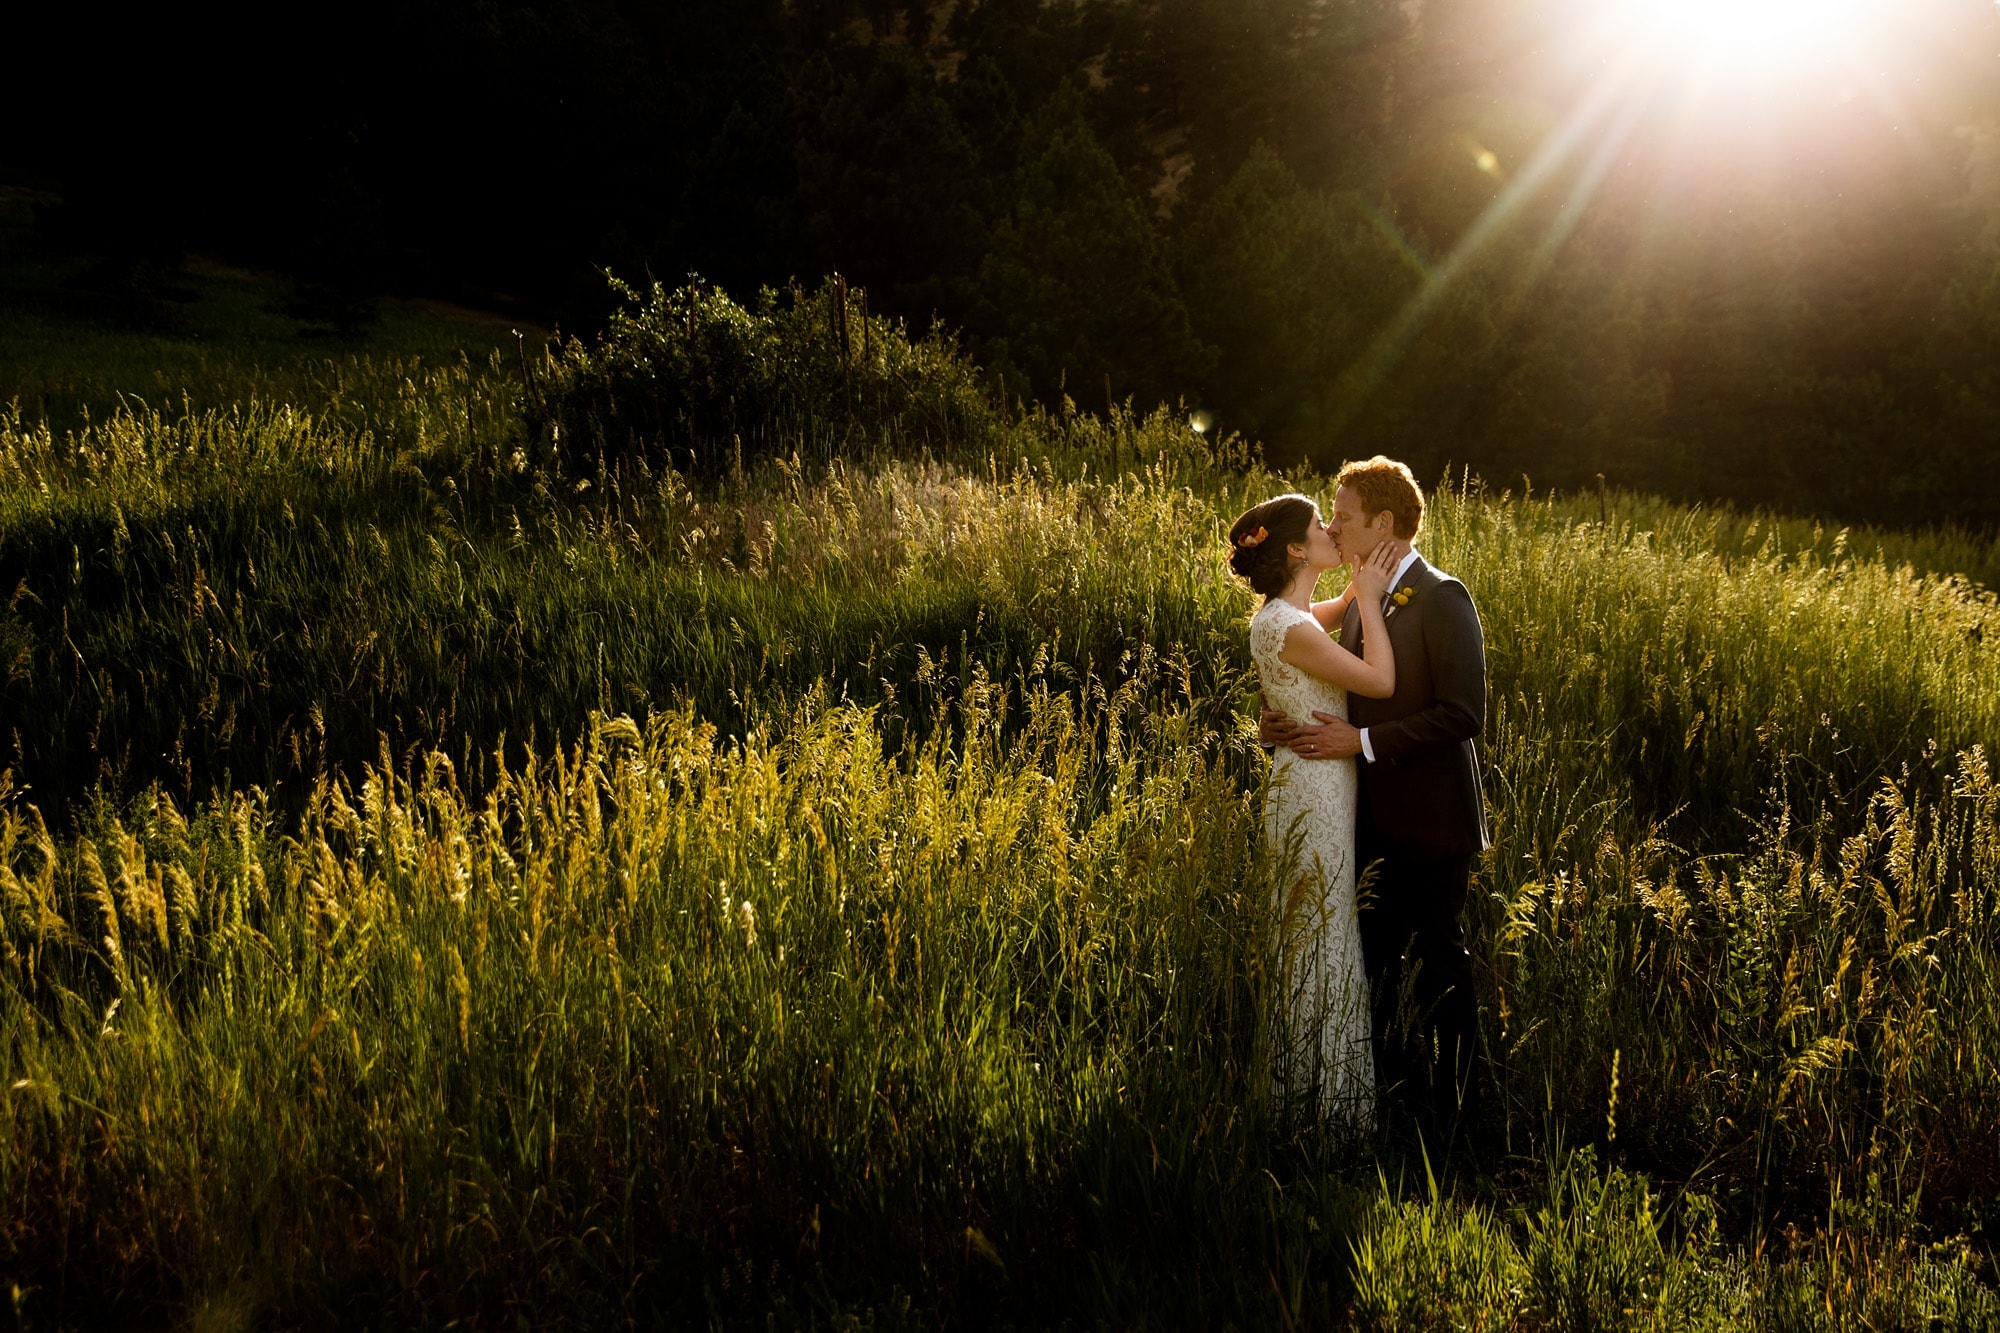 The sun flares over the couple as they kiss in Boulder near Centennial trailhead